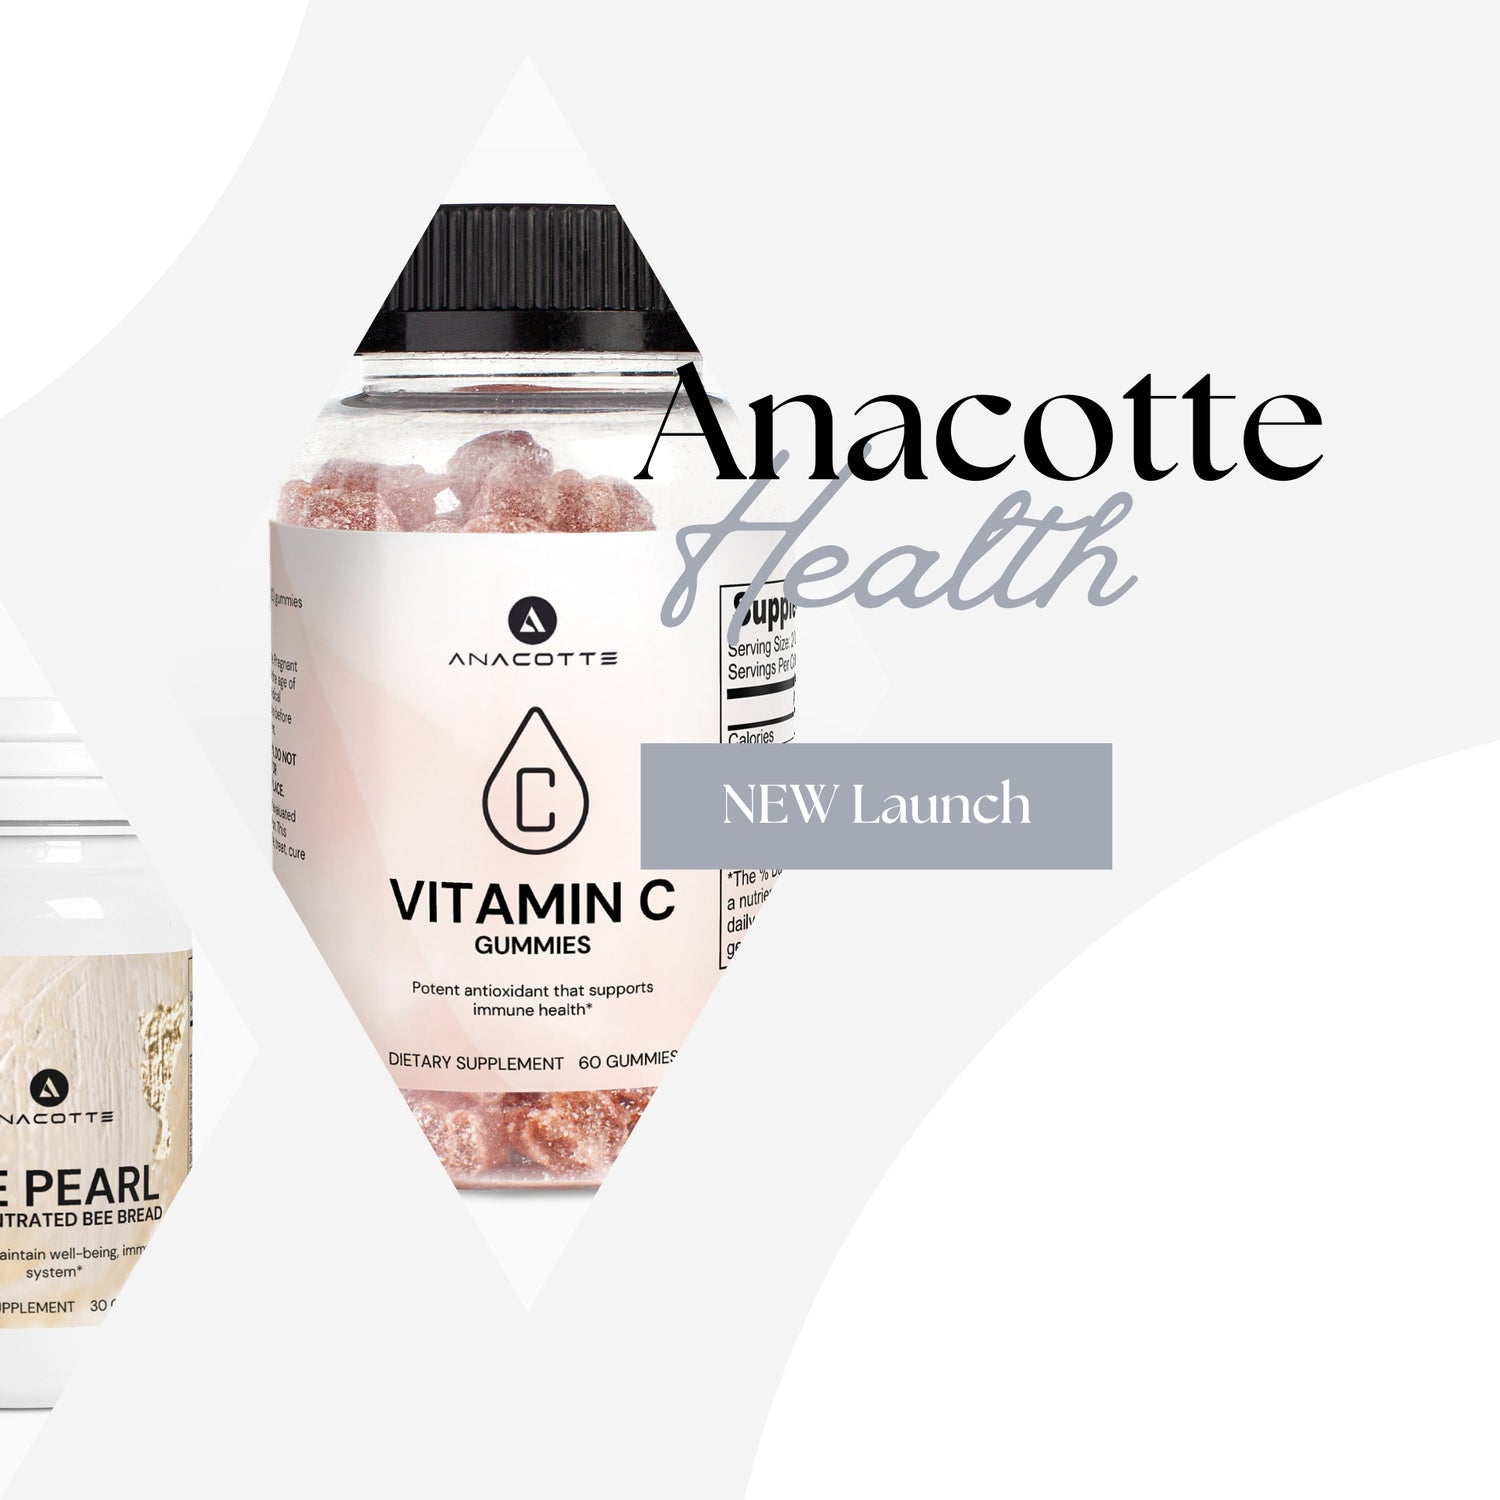 Introducing Anacotte Health